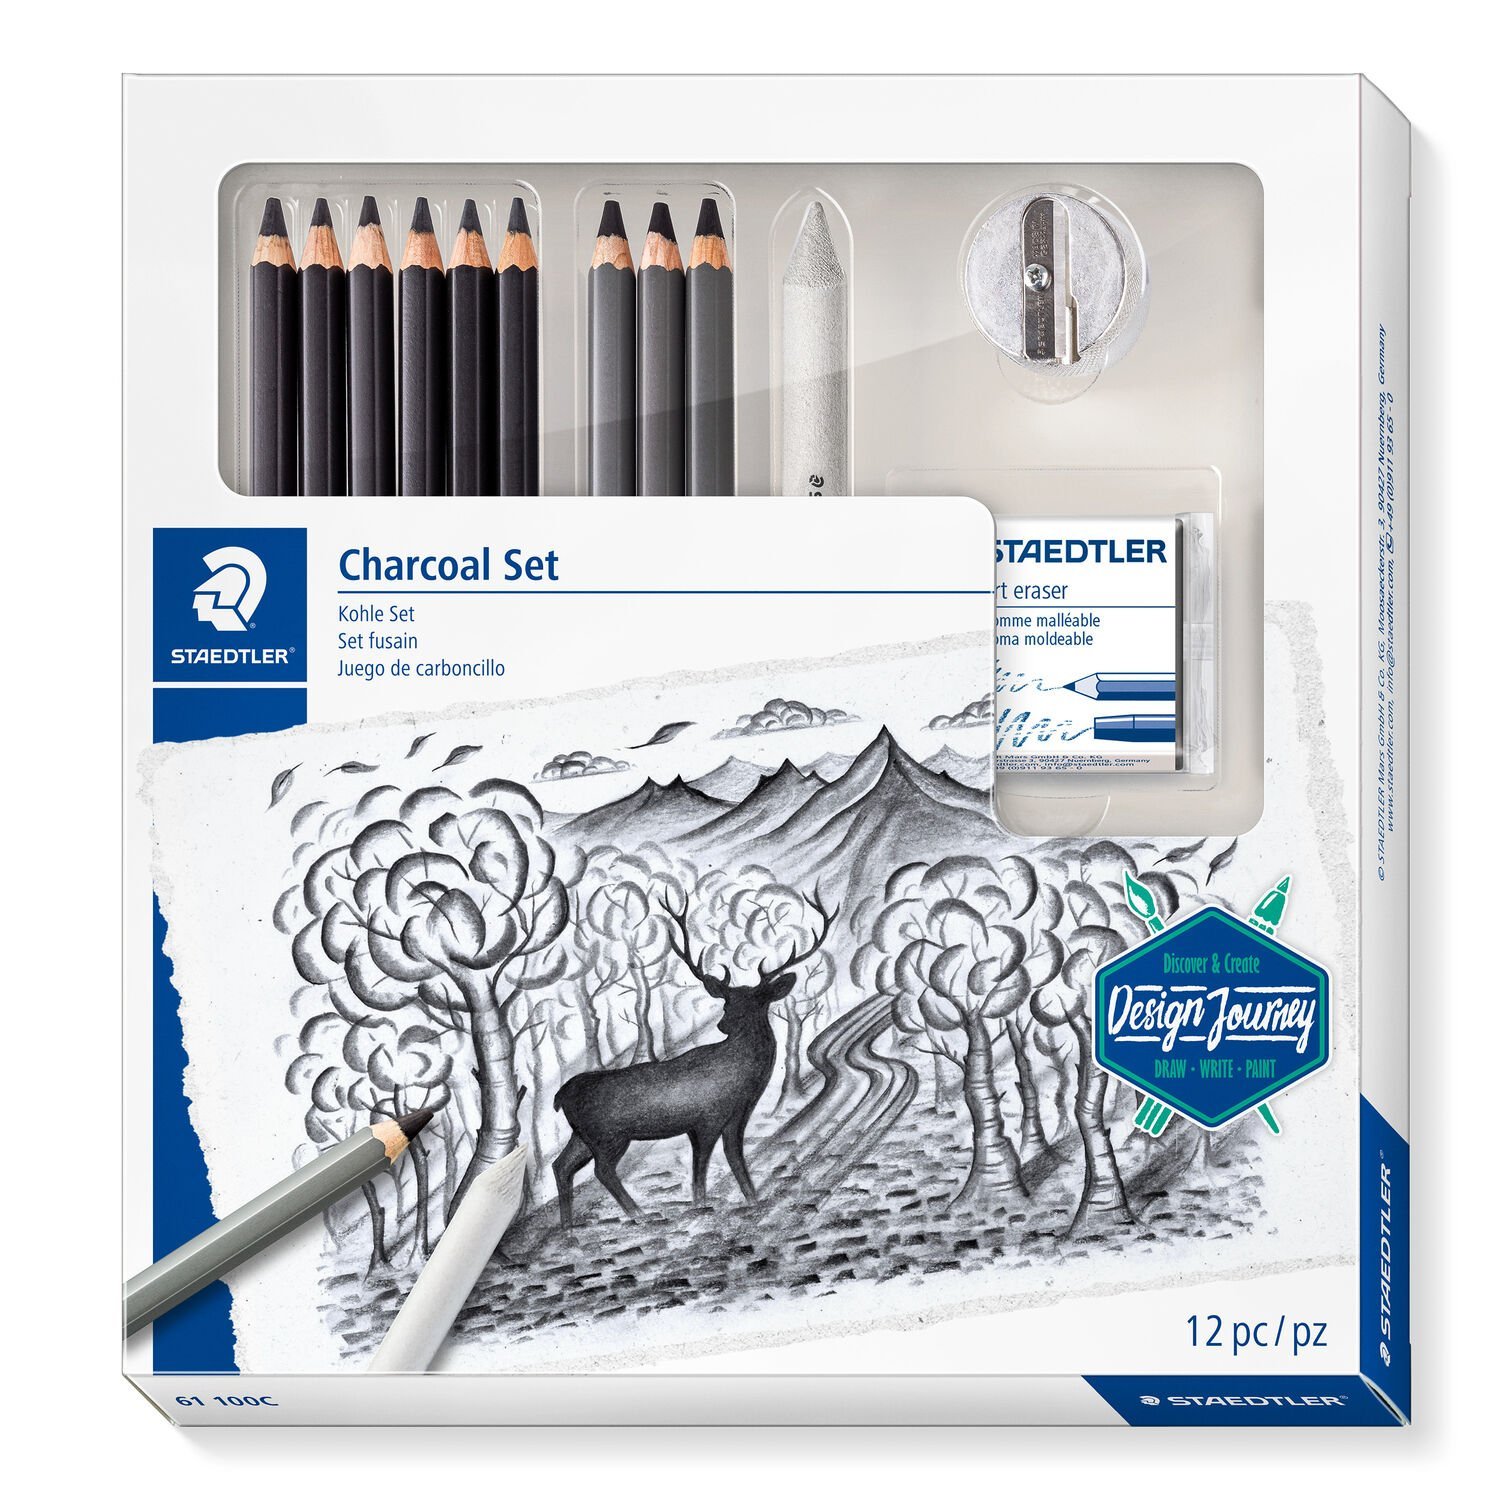 Cardboard box containing 6 drawing pencils in assorted degrees, 3 charcool pencils in assorted degrees, 1 paper stump, 1 kneadable eraser and 1 double-hole sharpener